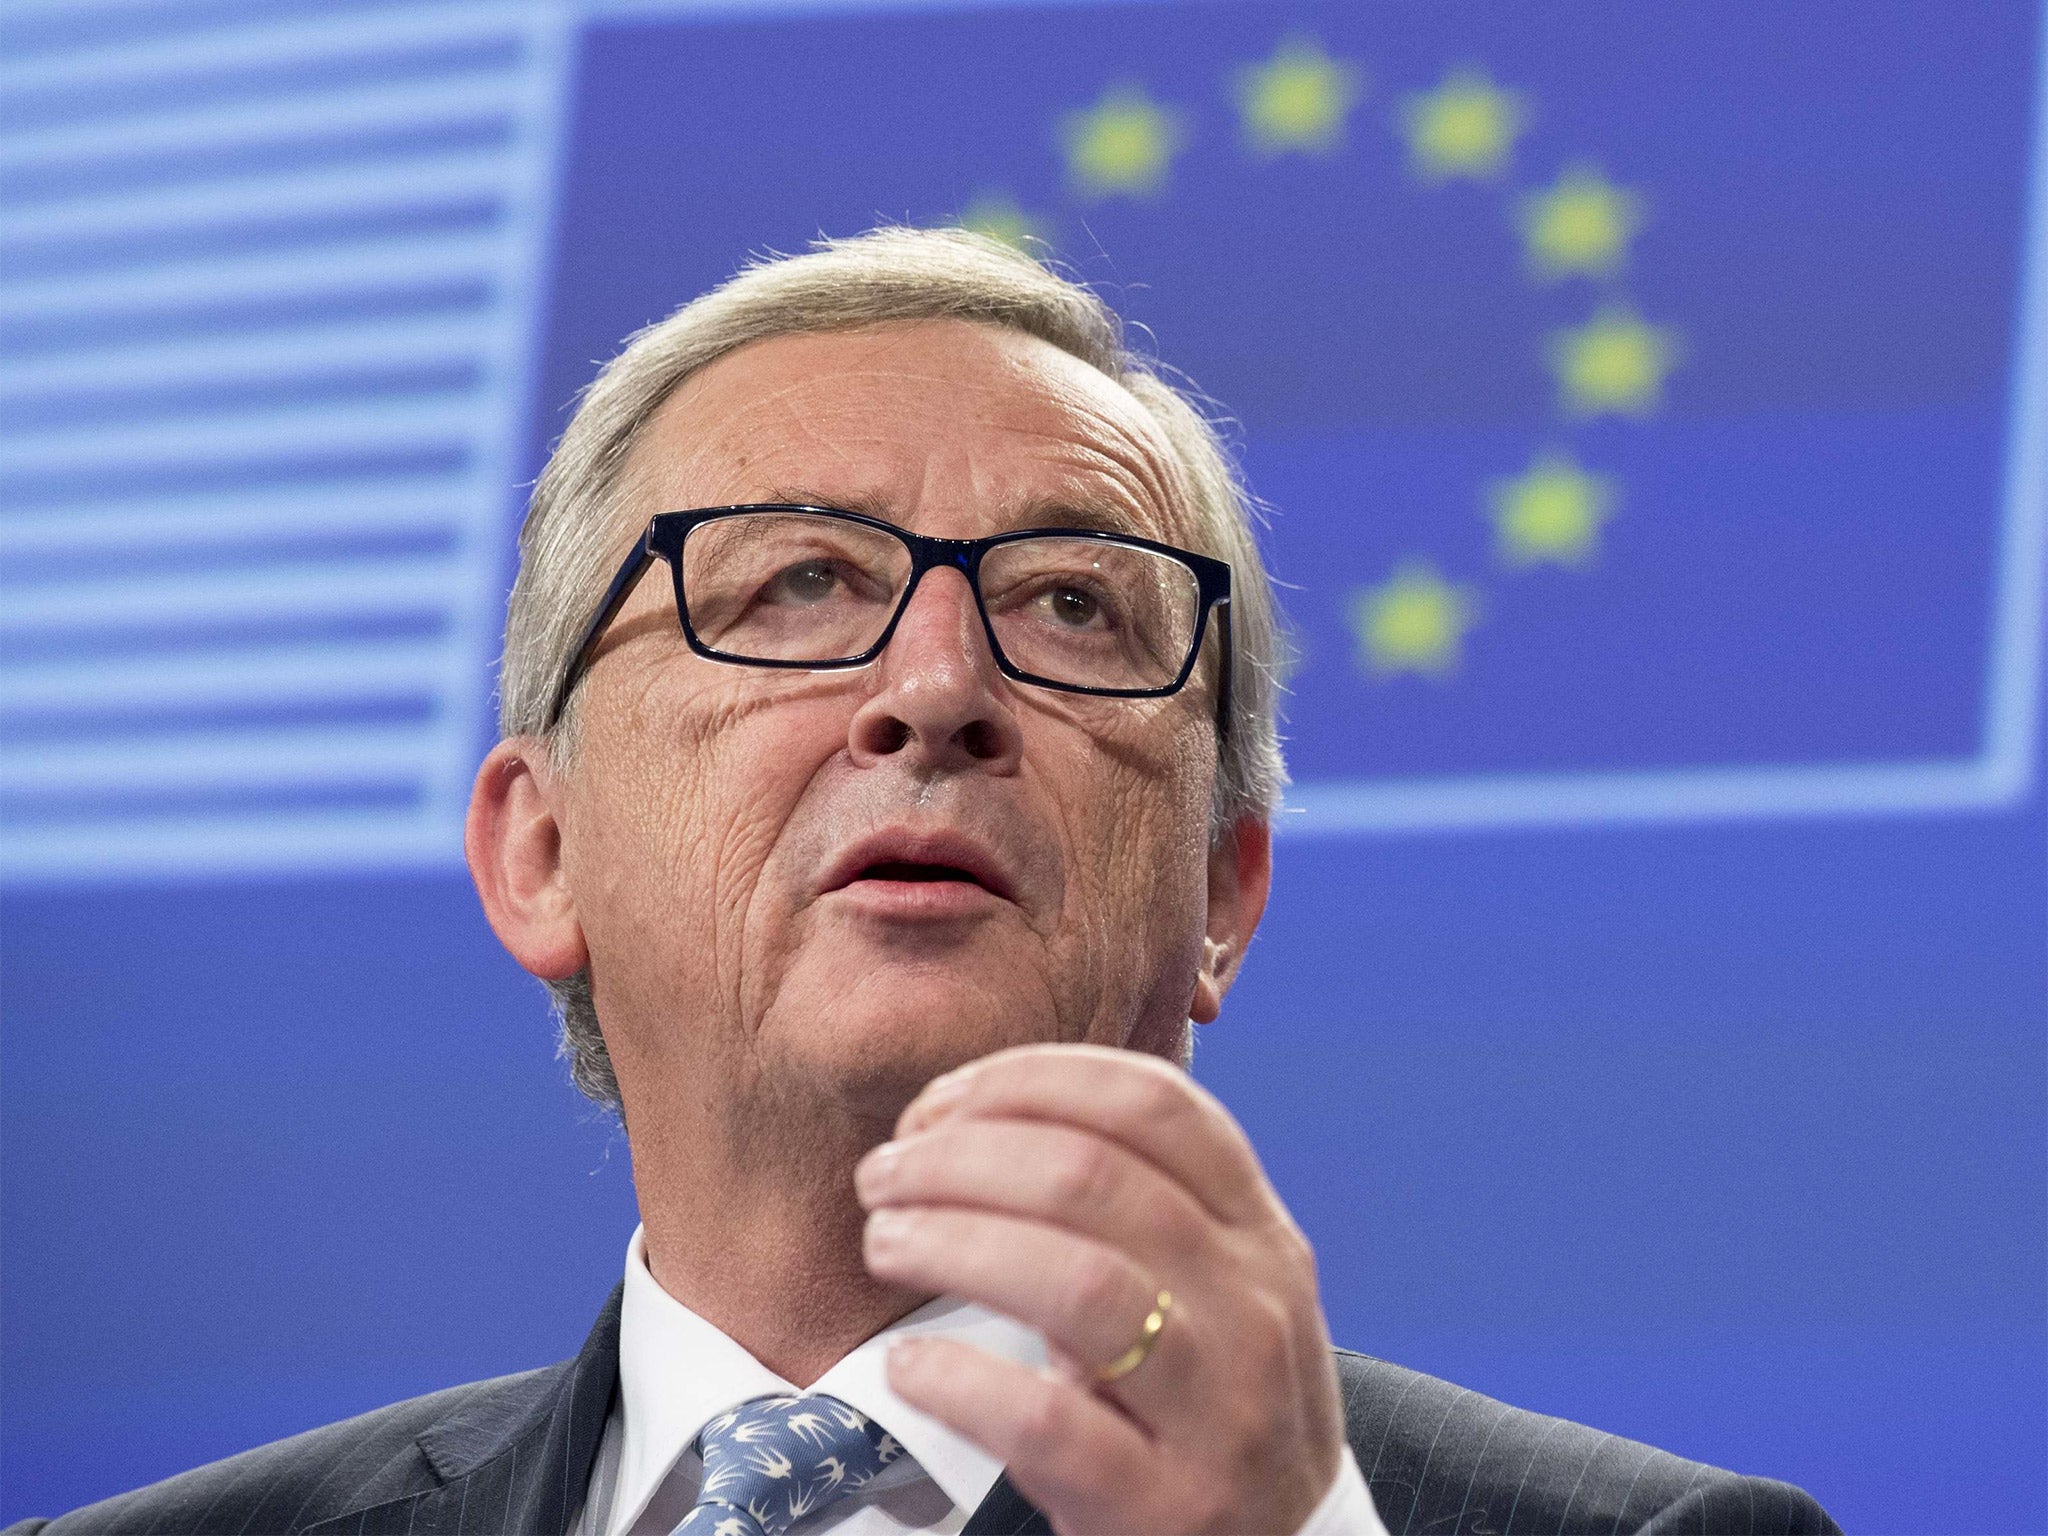 European Commission chief Jean-Claude Juncker gestures during a press conference in Brussels on Wednesday